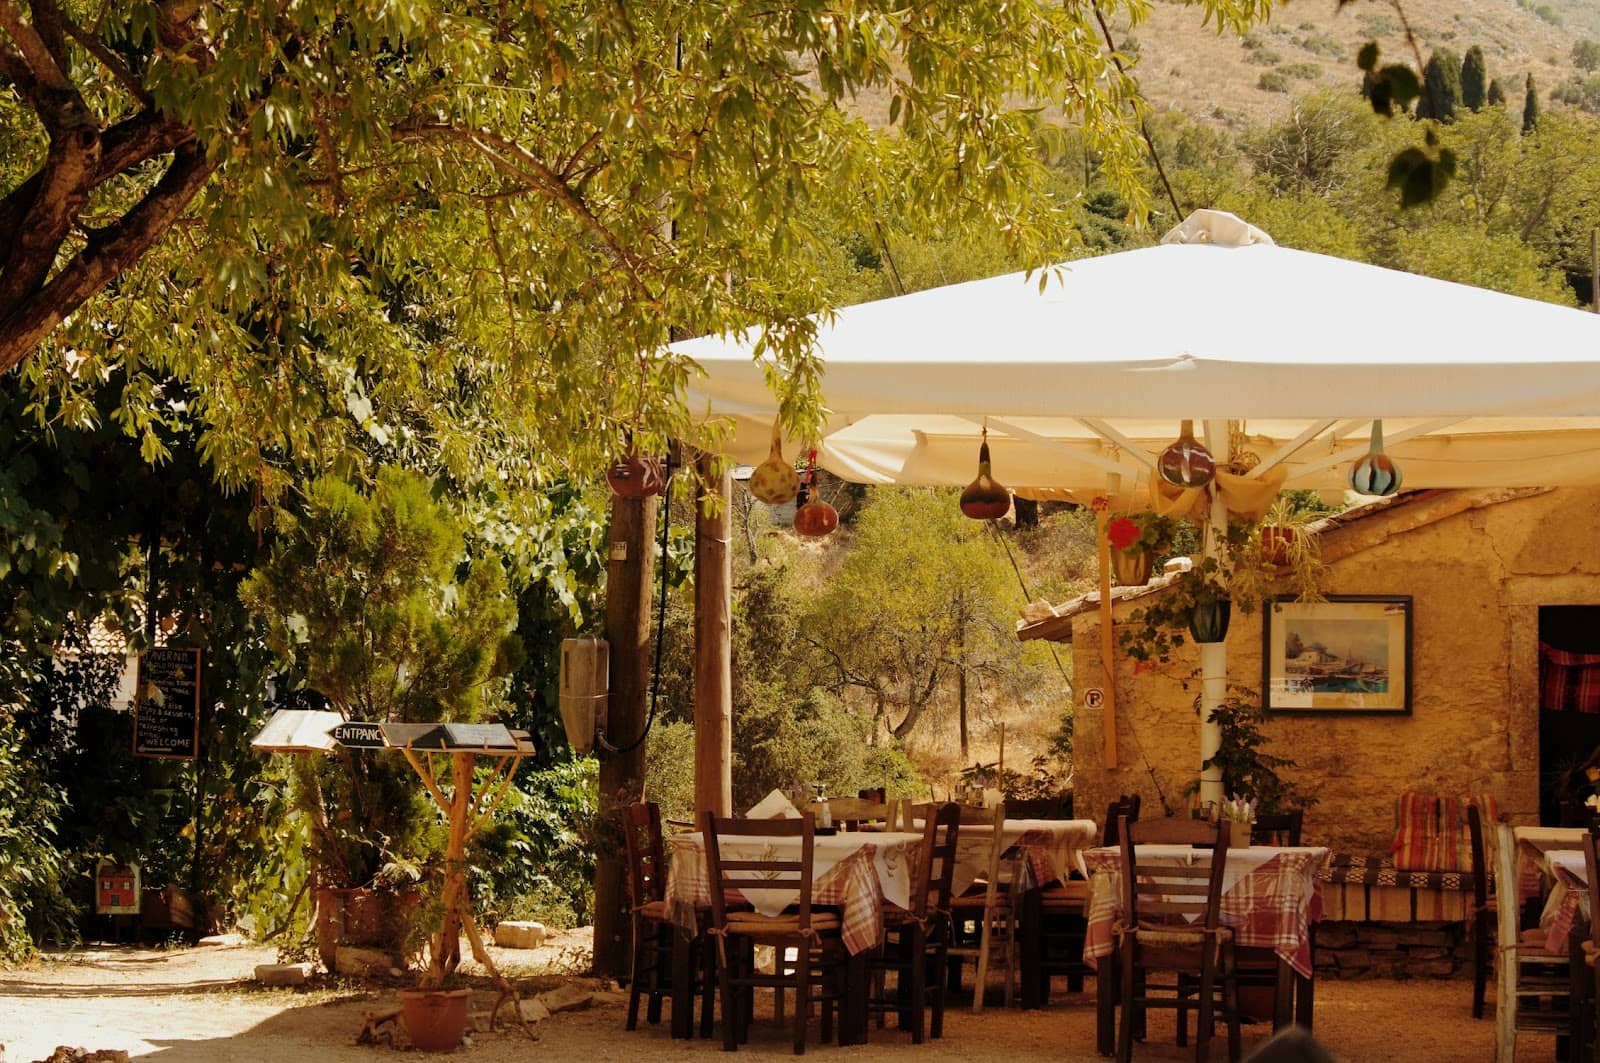 An outdoor rustic tavern with wooden tables, checkered tablecloths, and a white canopy amidst lush greenery